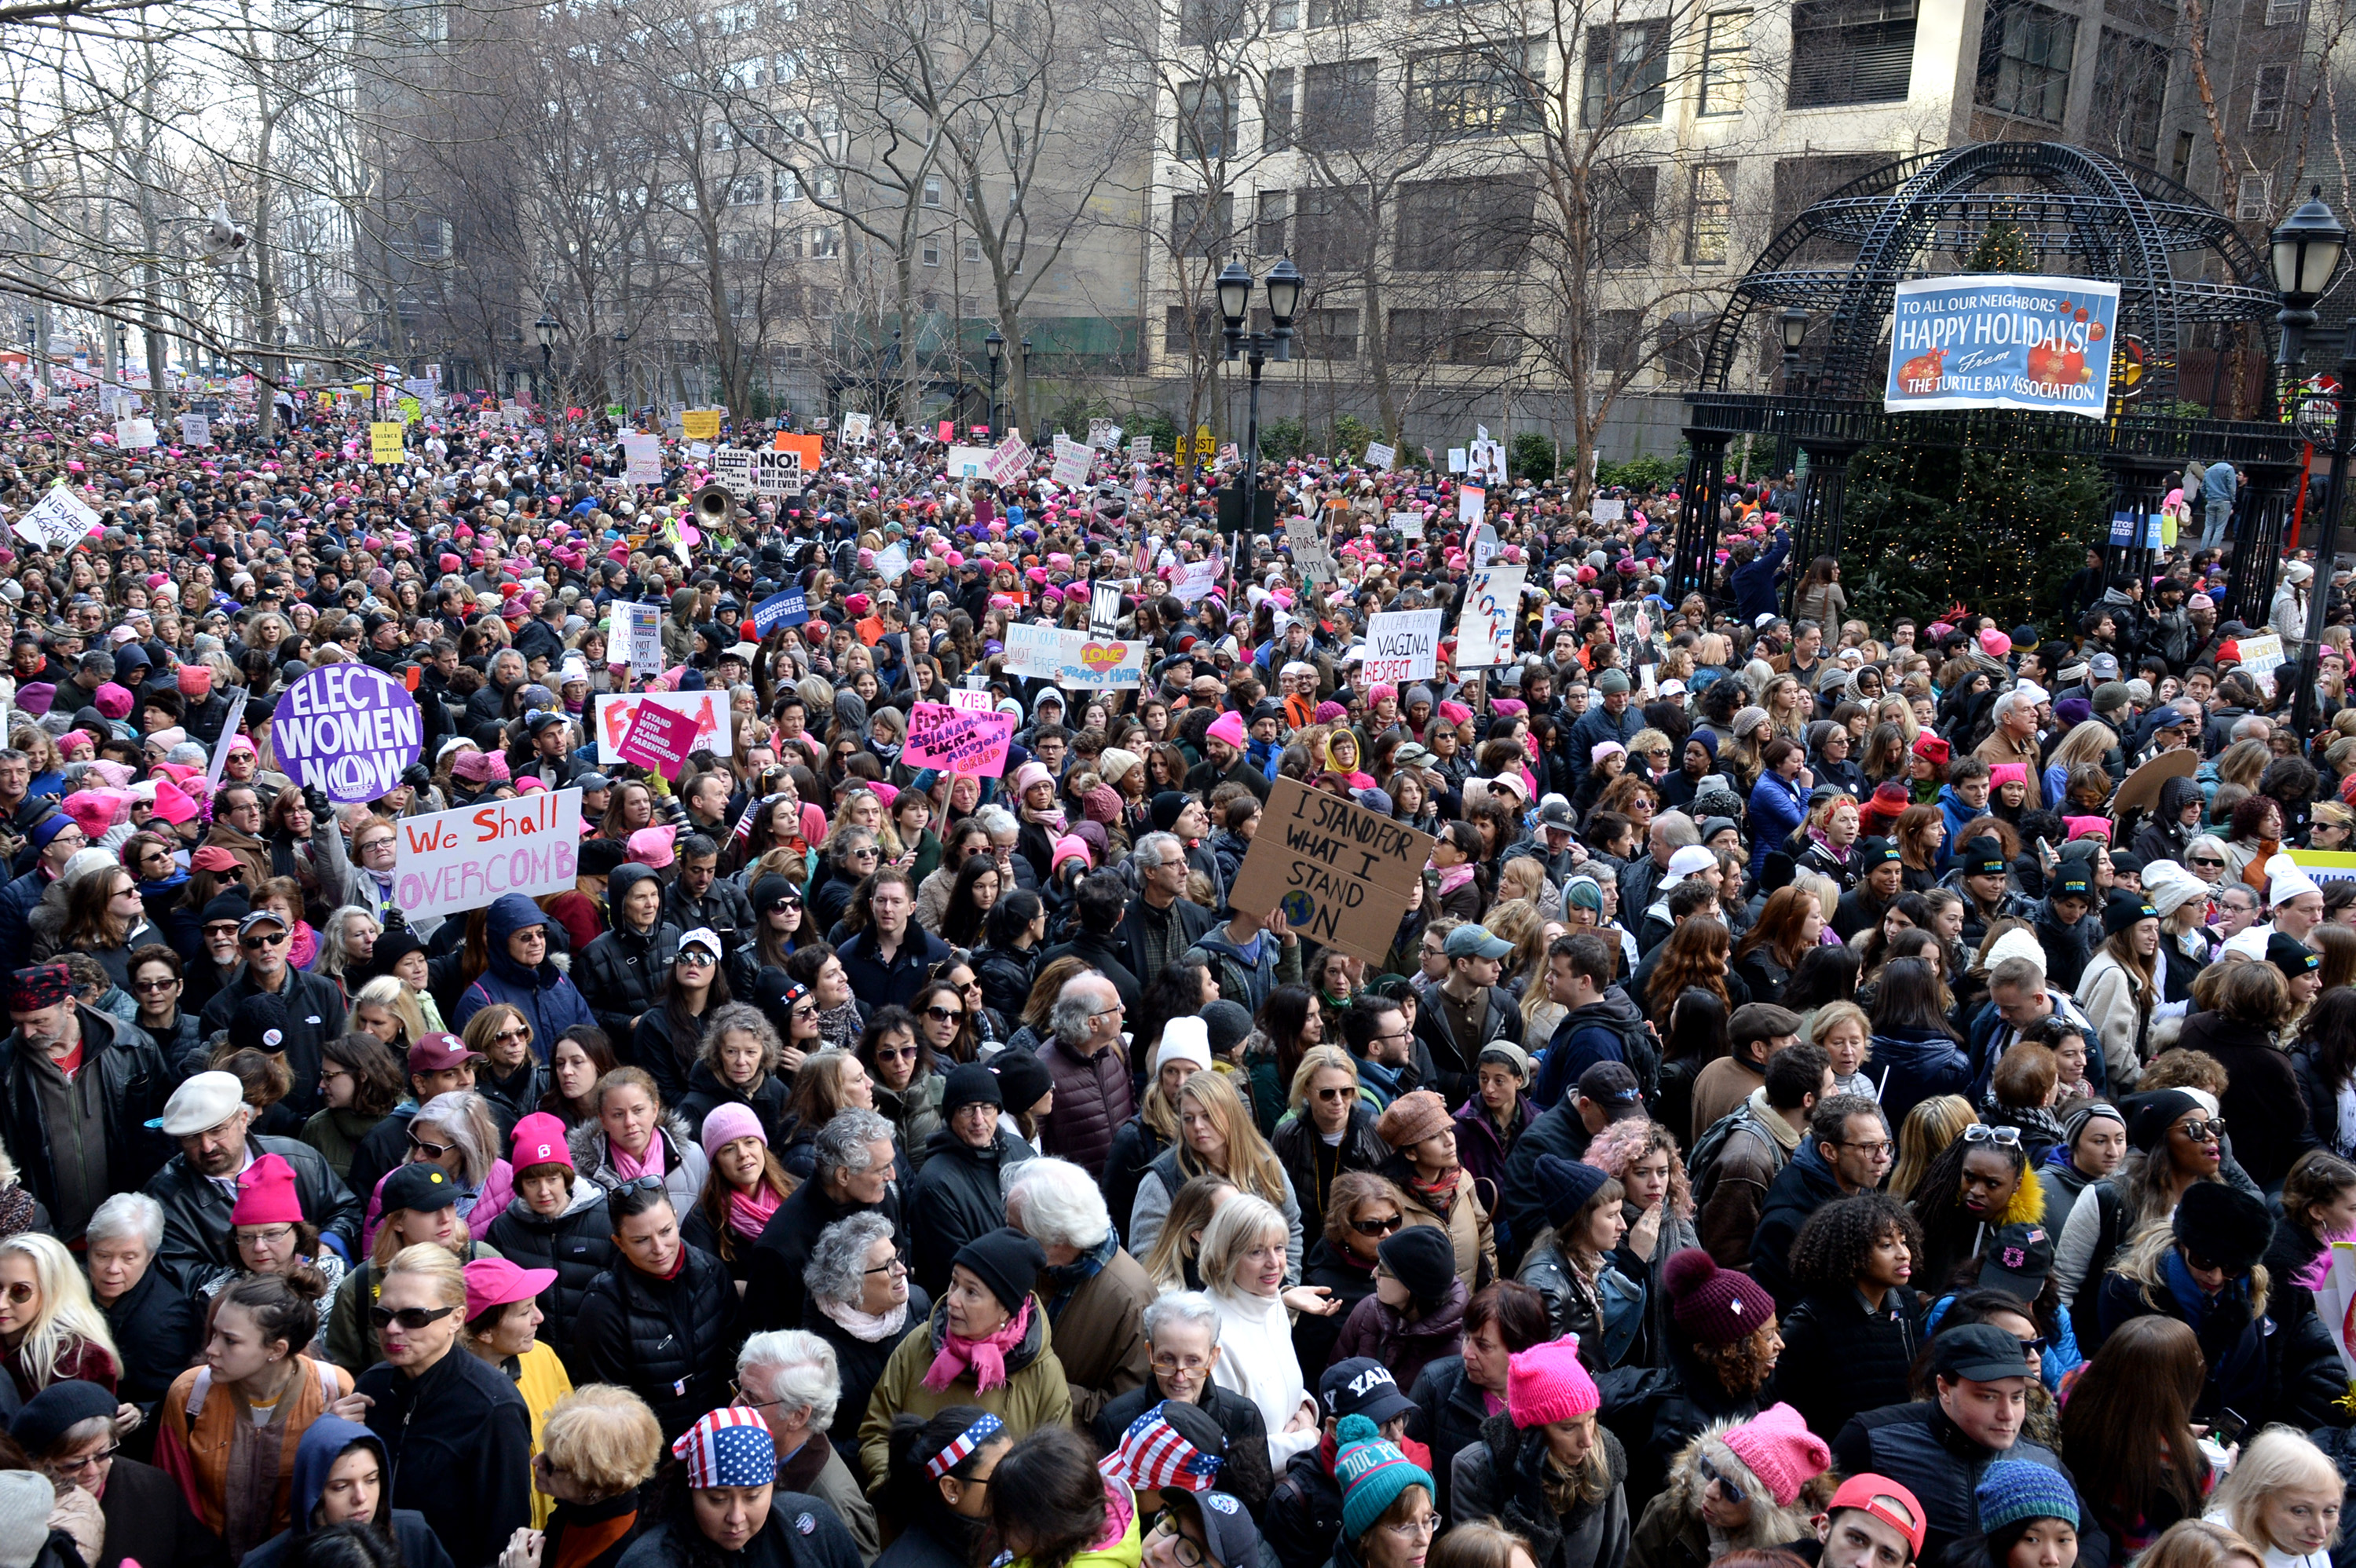 Supporters are seen during the Women's March sister march in New York City on Jan. 21, 2017. (Andrew Toth/WireImage)